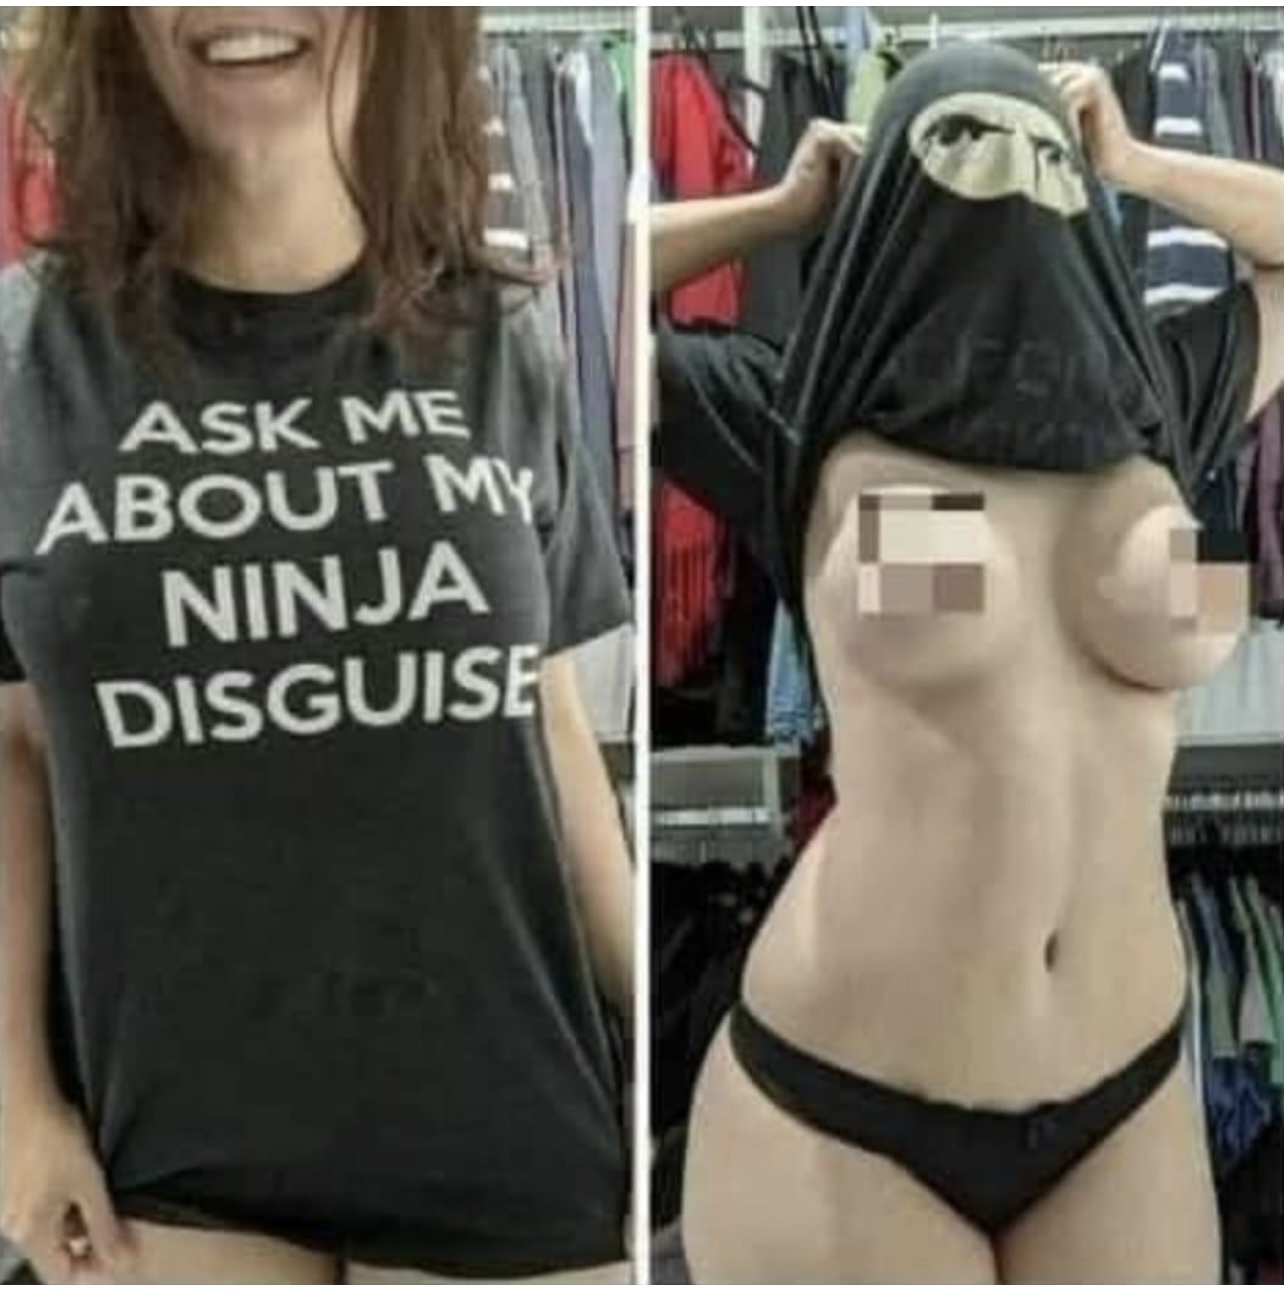 allison dawkins recommends ask me about my ninja disguise boobs pic